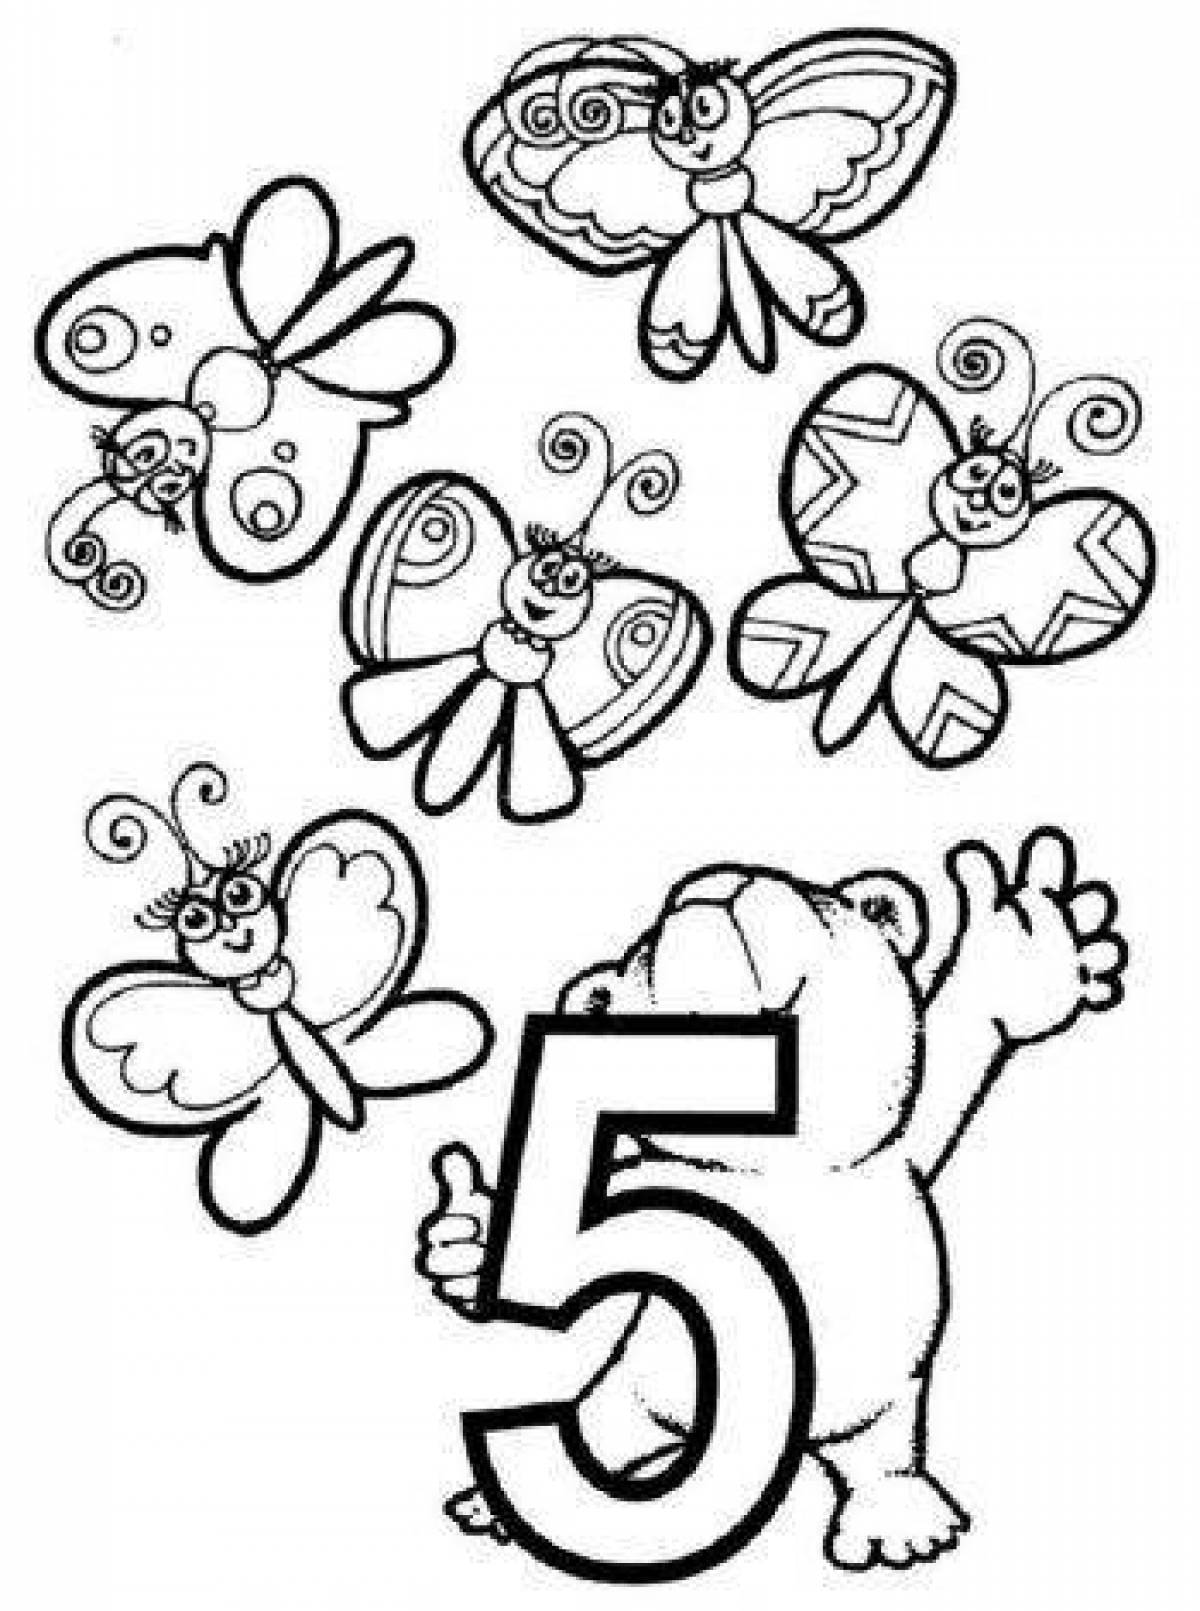 Coloring book invitation number 23